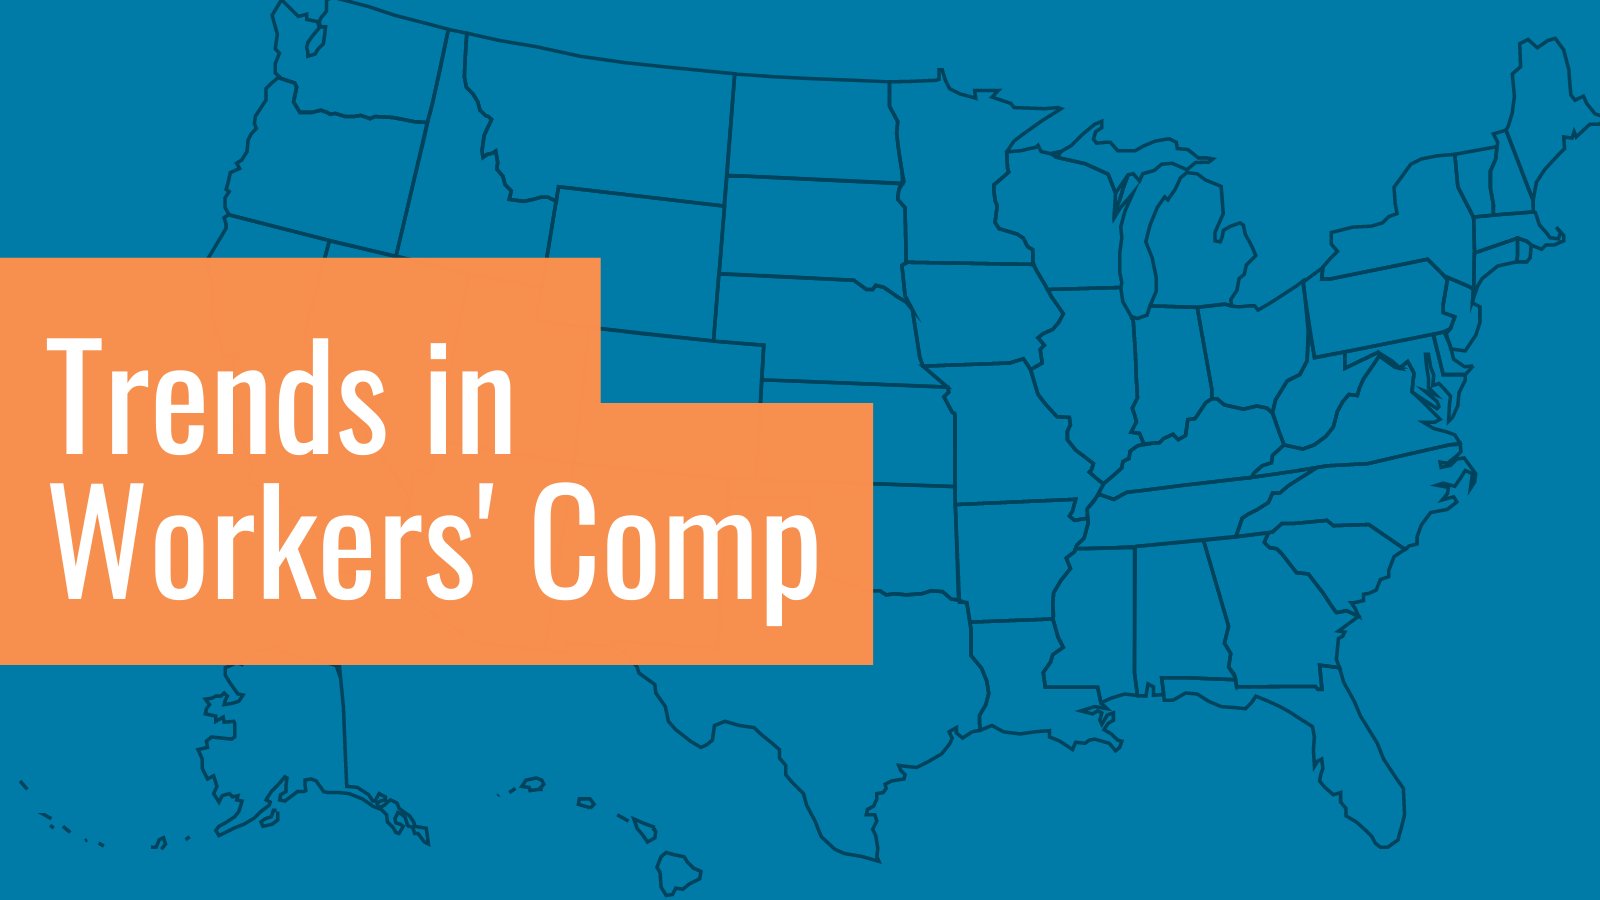 A map of the United States with the text "Trends in Workers' Comp"